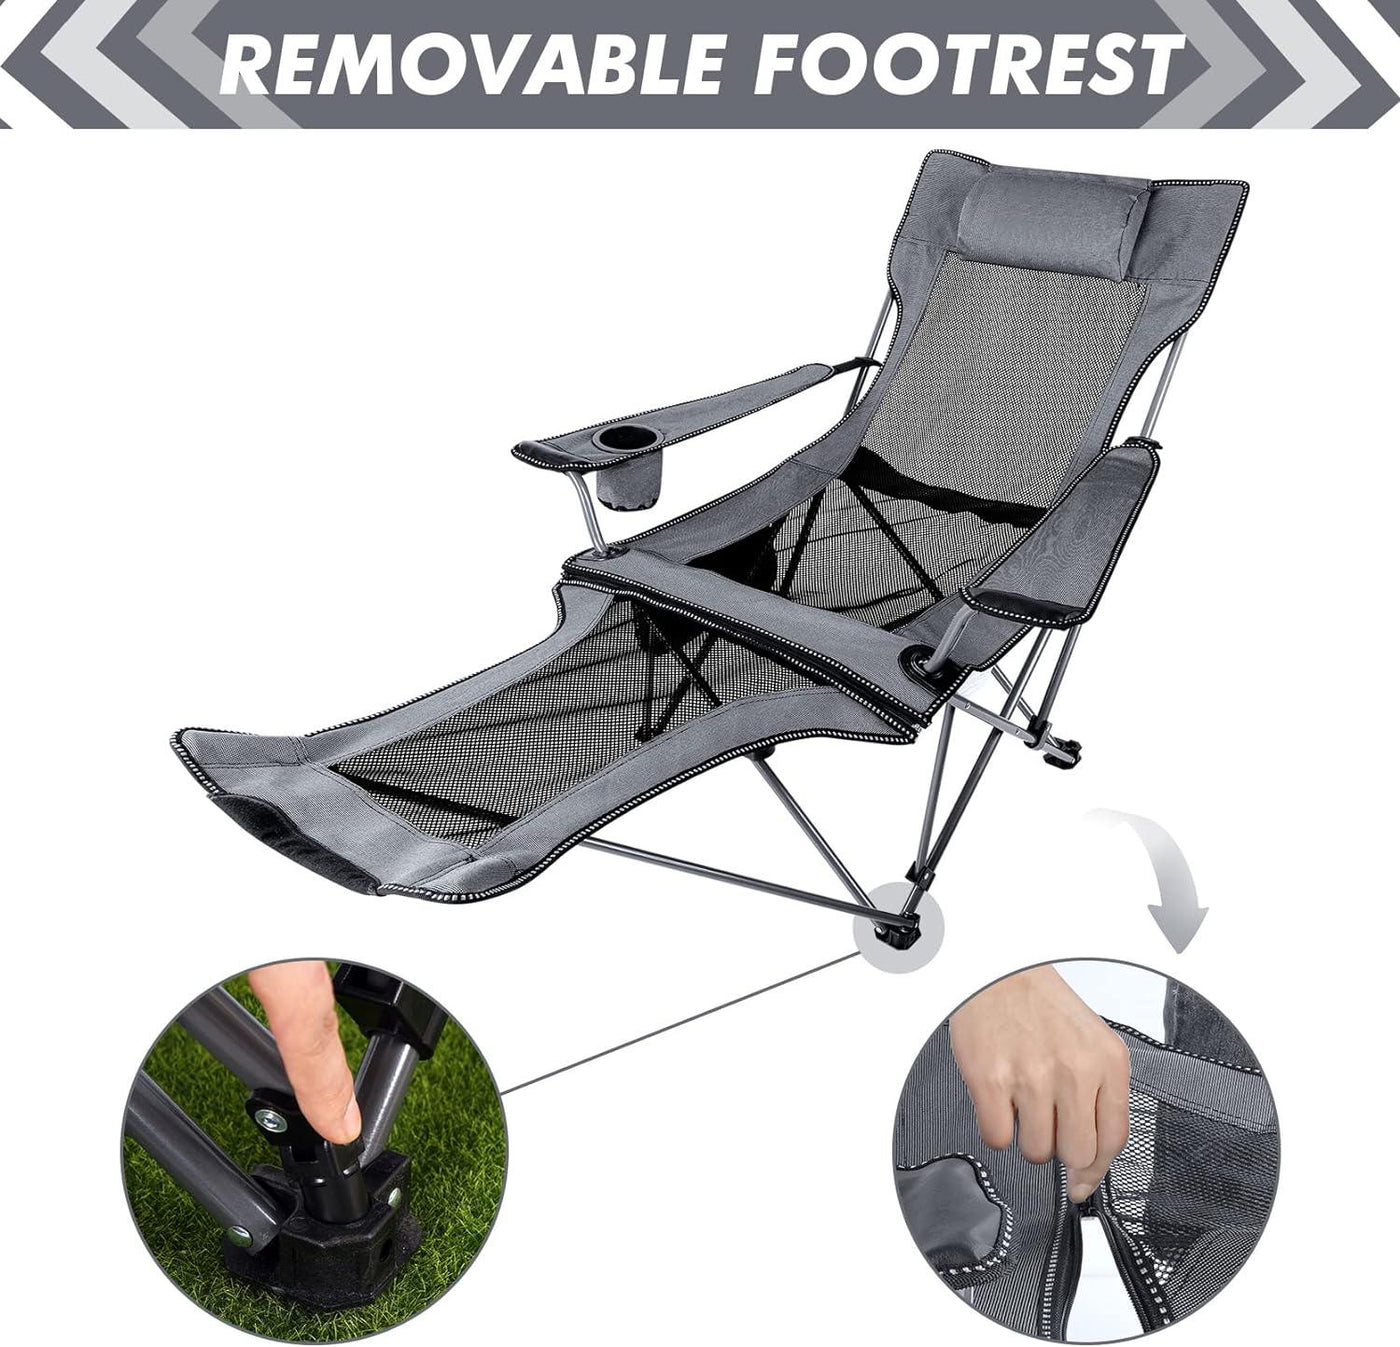 Foldable Camping Chair with Adjustable Recliner & Integrated Footrest - Massive Discounts